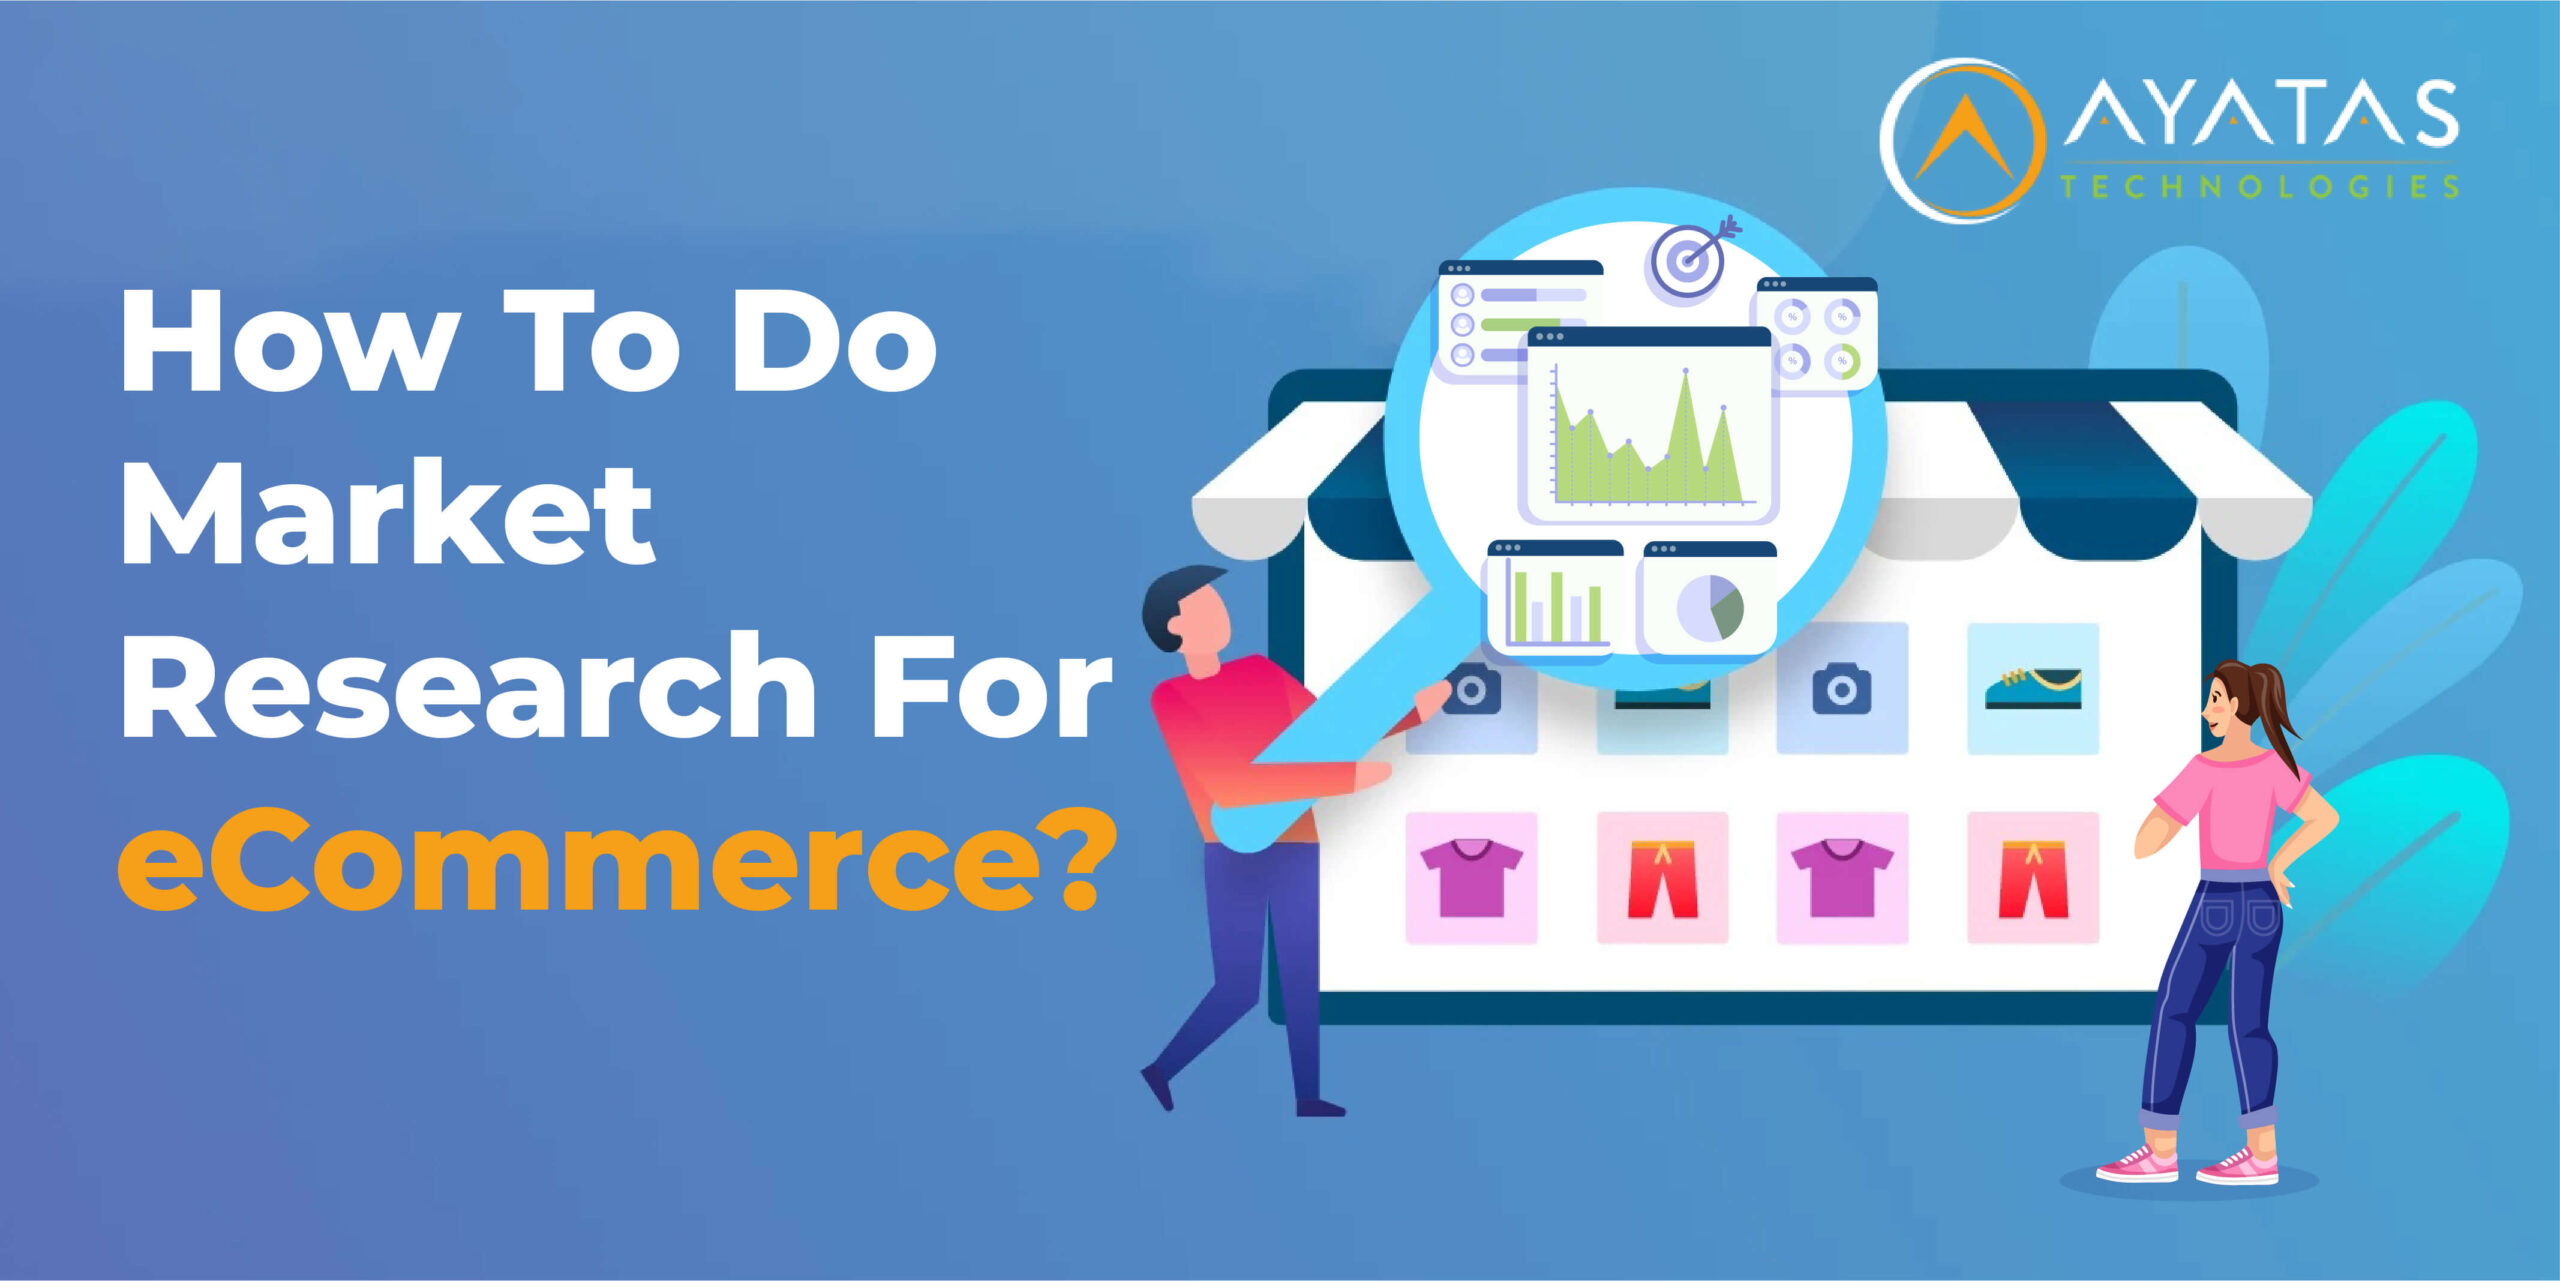 How to do market research for ecommerce - Ayatas Technologies